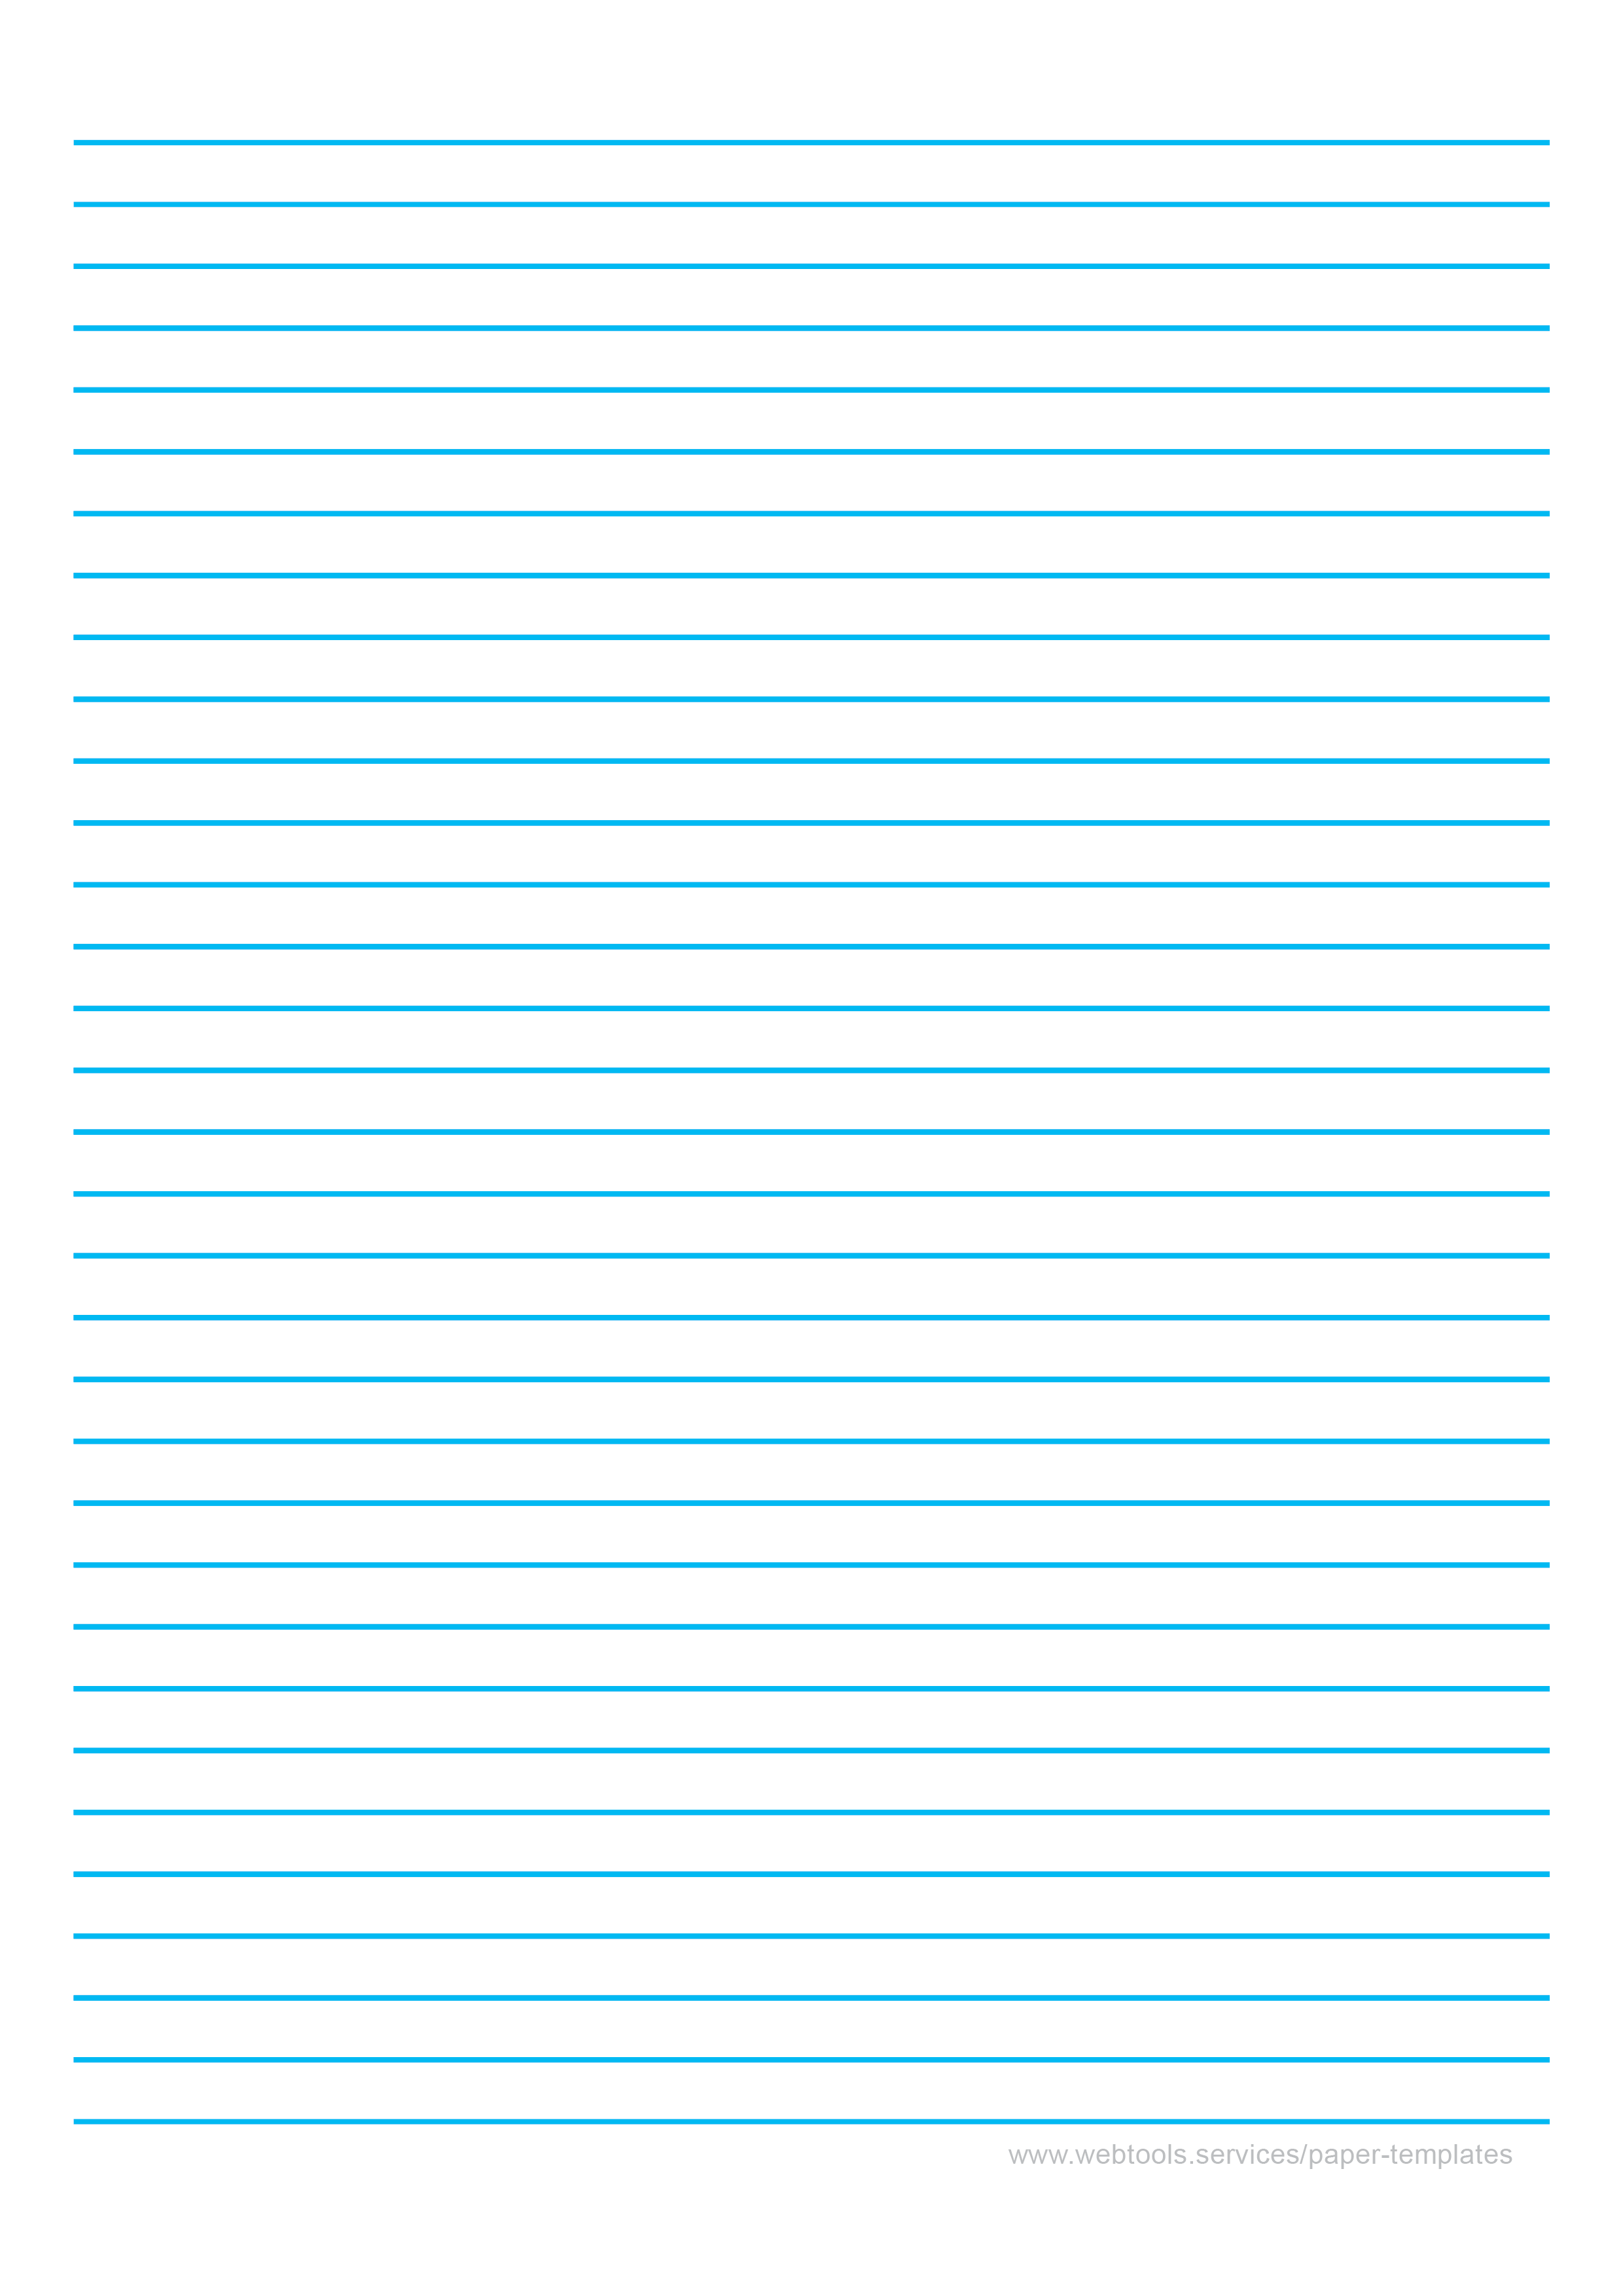 Blue Lined Paper Template With 8 mm Line Height